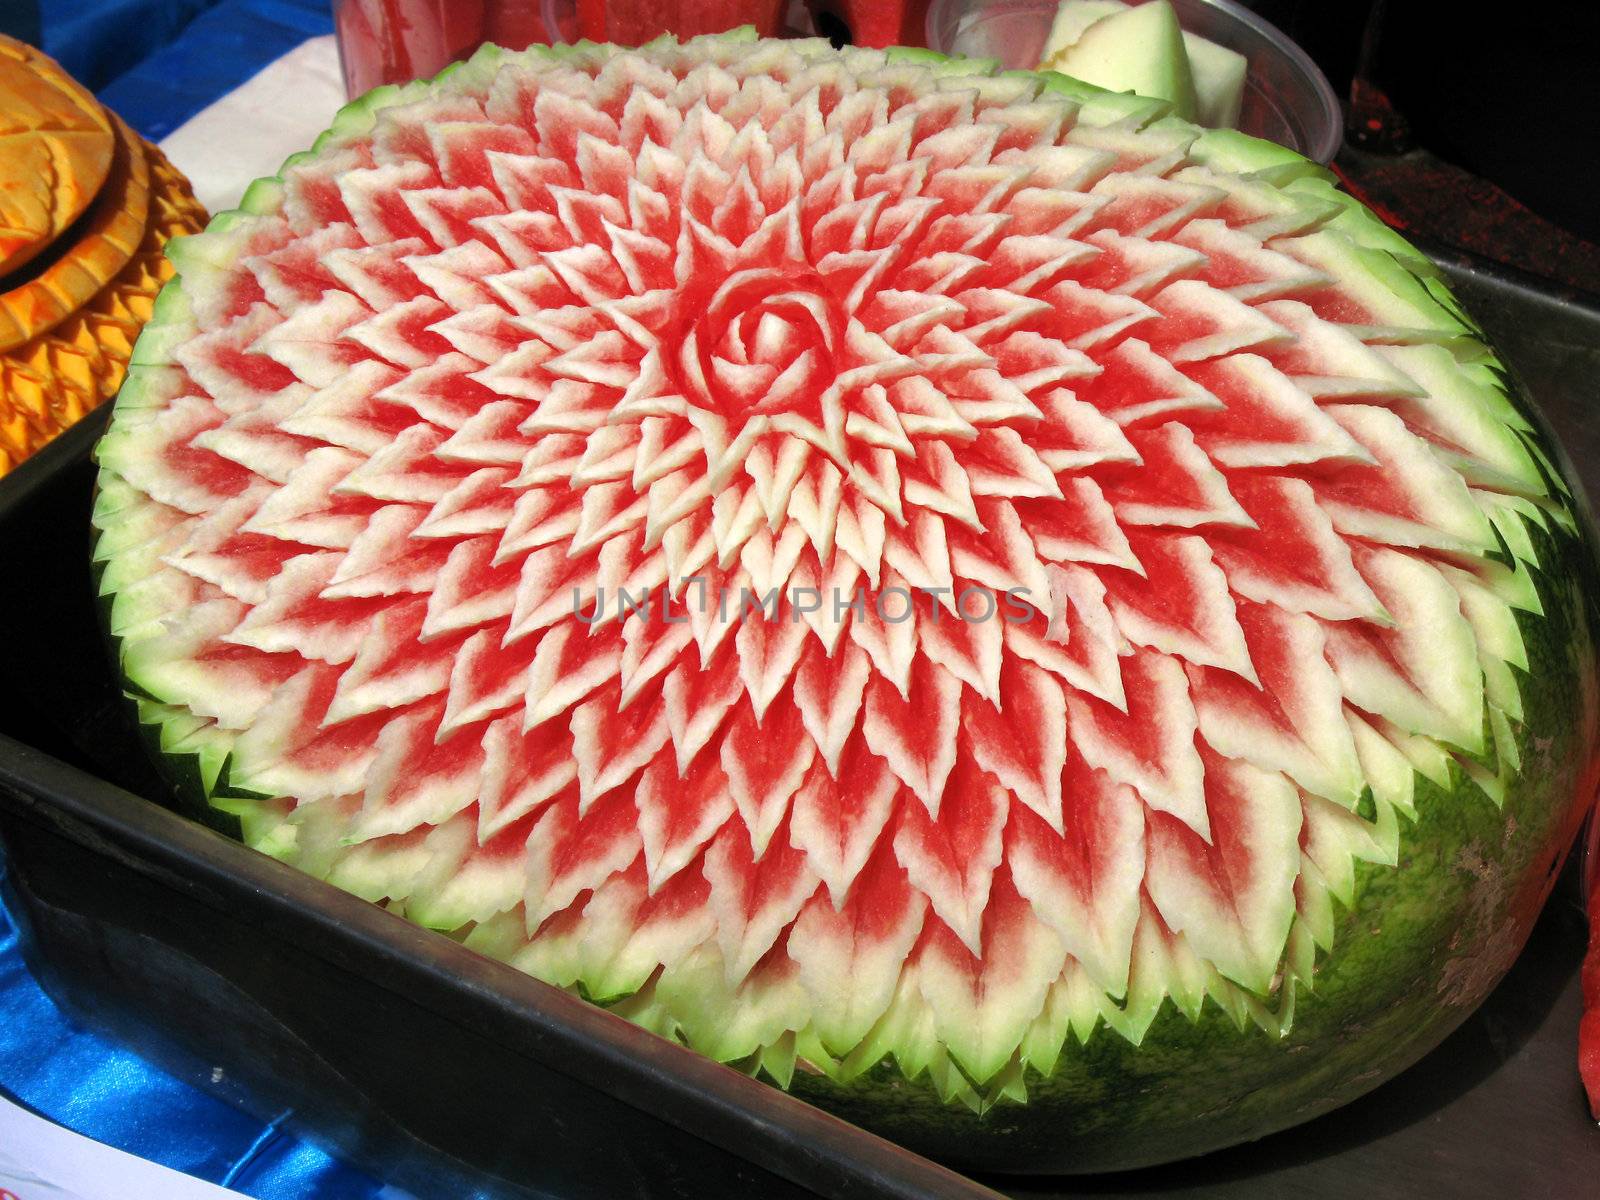 Carved watermelon by tommroch